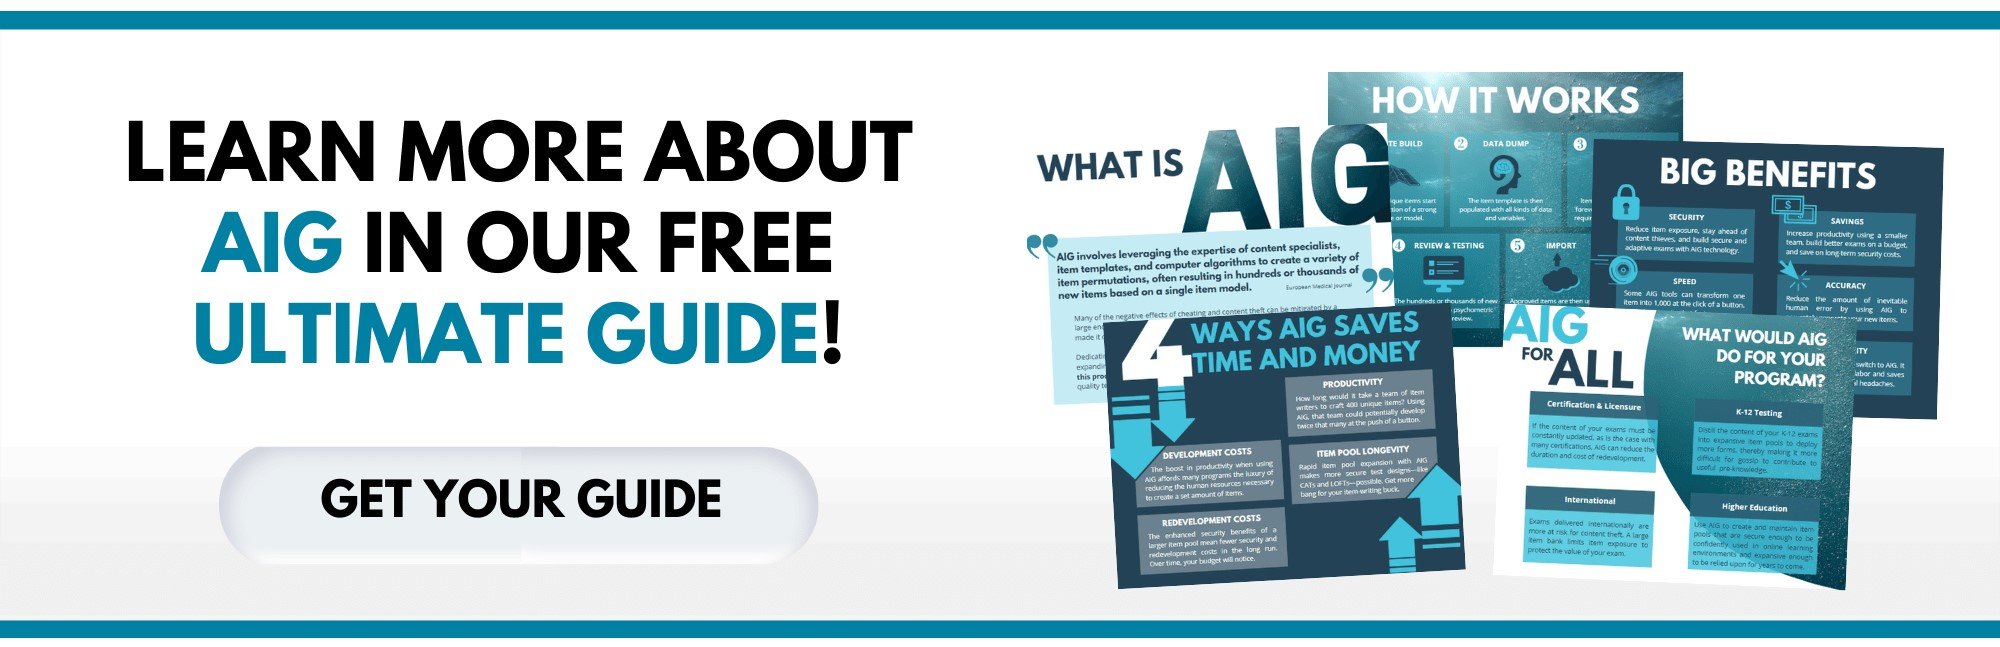 Get the AIG Ultimate Guide